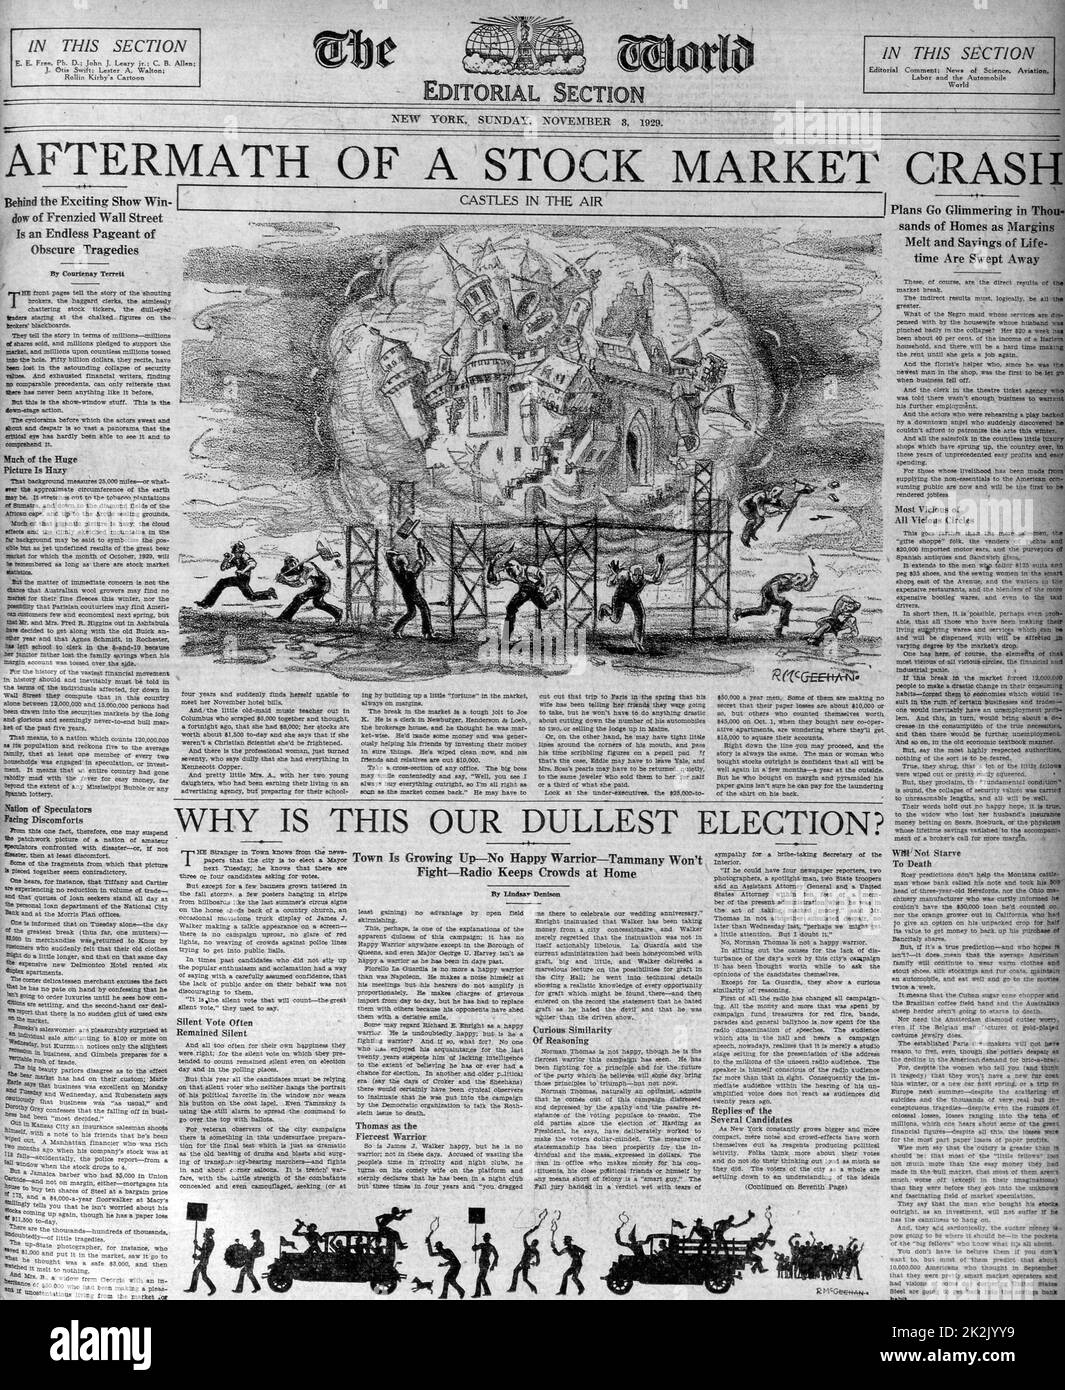 The (Wall Street) stock market crash 1929 depicted in a newspaper of the period. Stock Photo